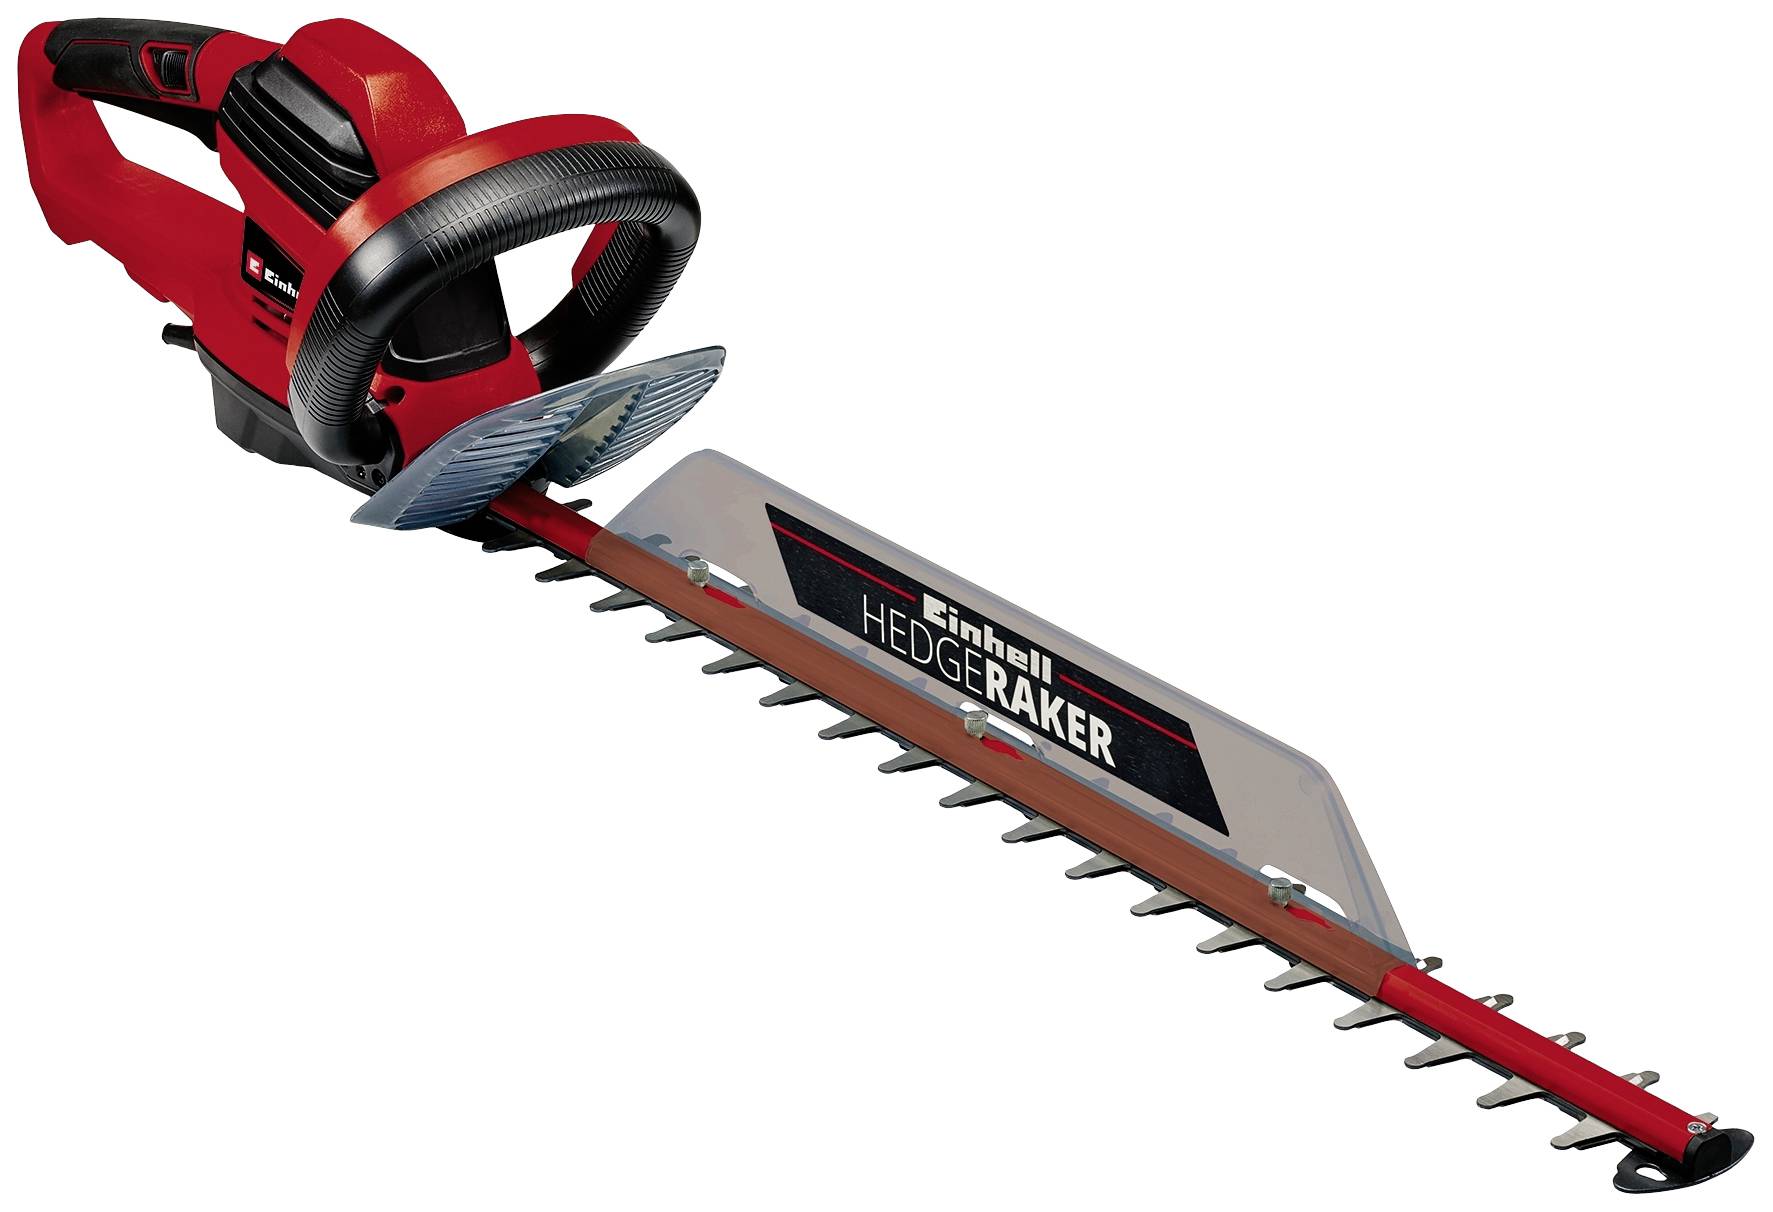 700w hedge trimmer